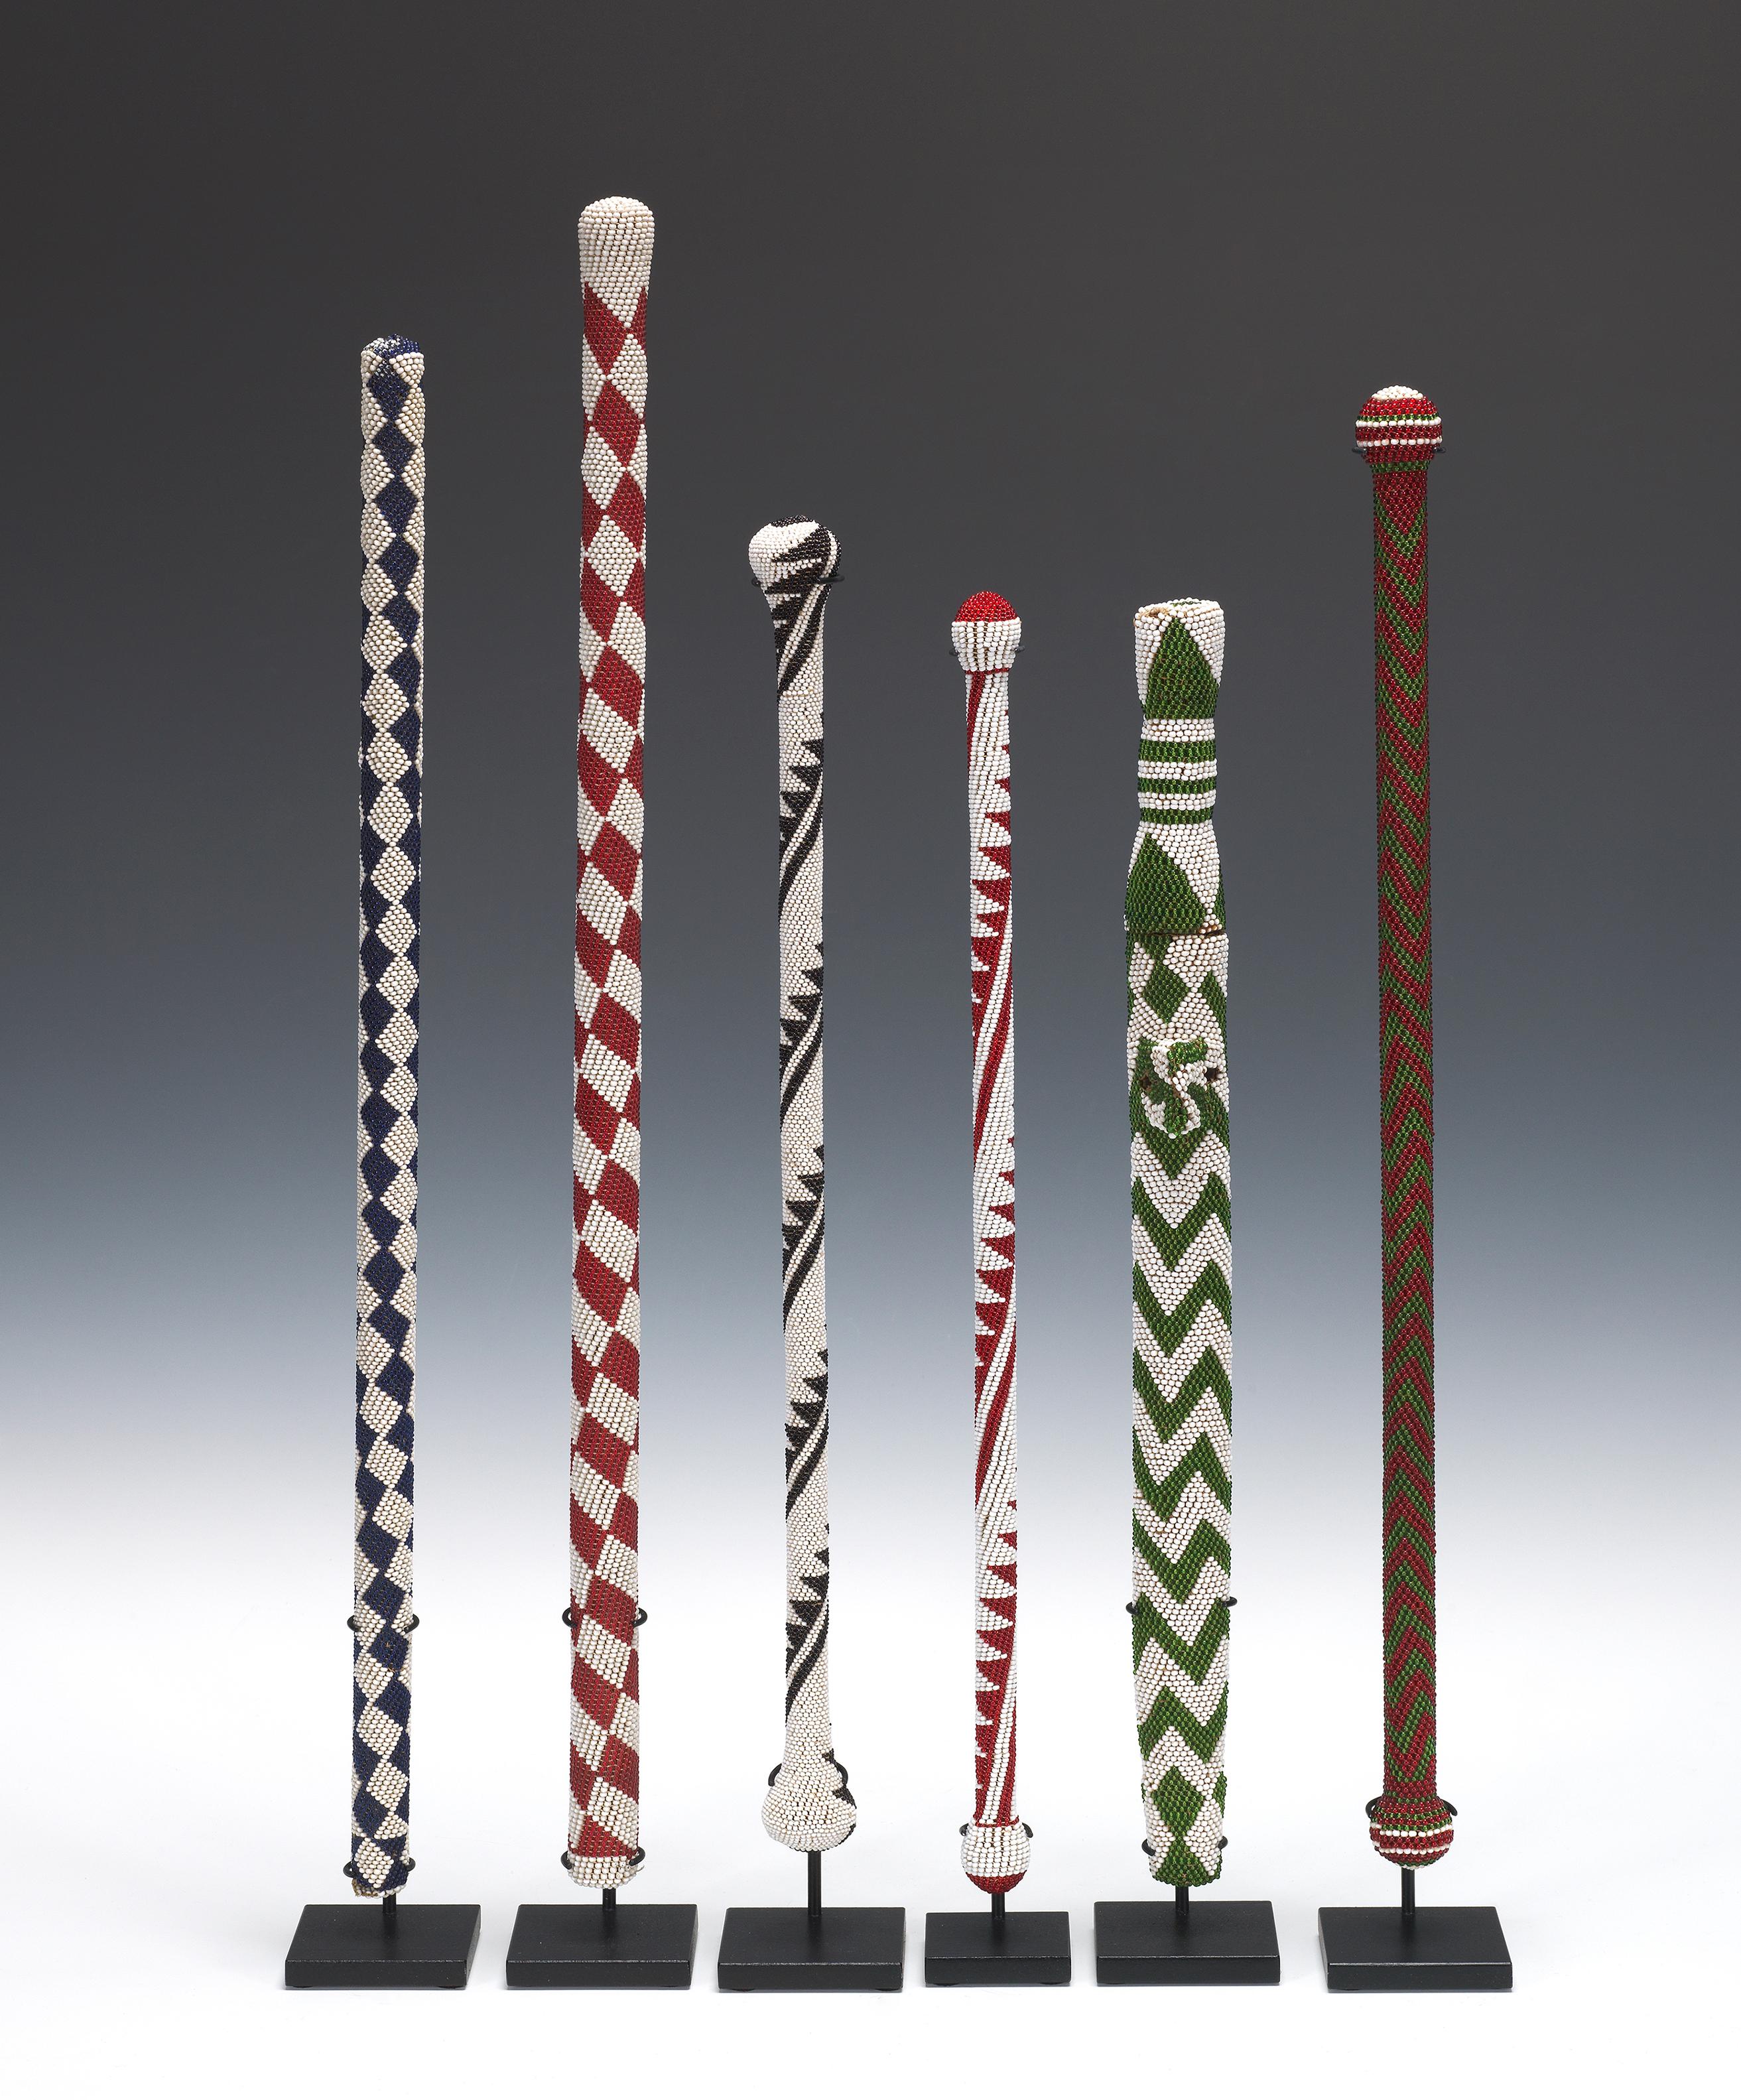 A group of six beaded wood Tutsi  and Hutu ceremonial objects, the green striped one second from right is a knife, the others were used as staffs by elite members of the Tutsi and Hutu tribes. All were brought back to Belgium by colonists returning